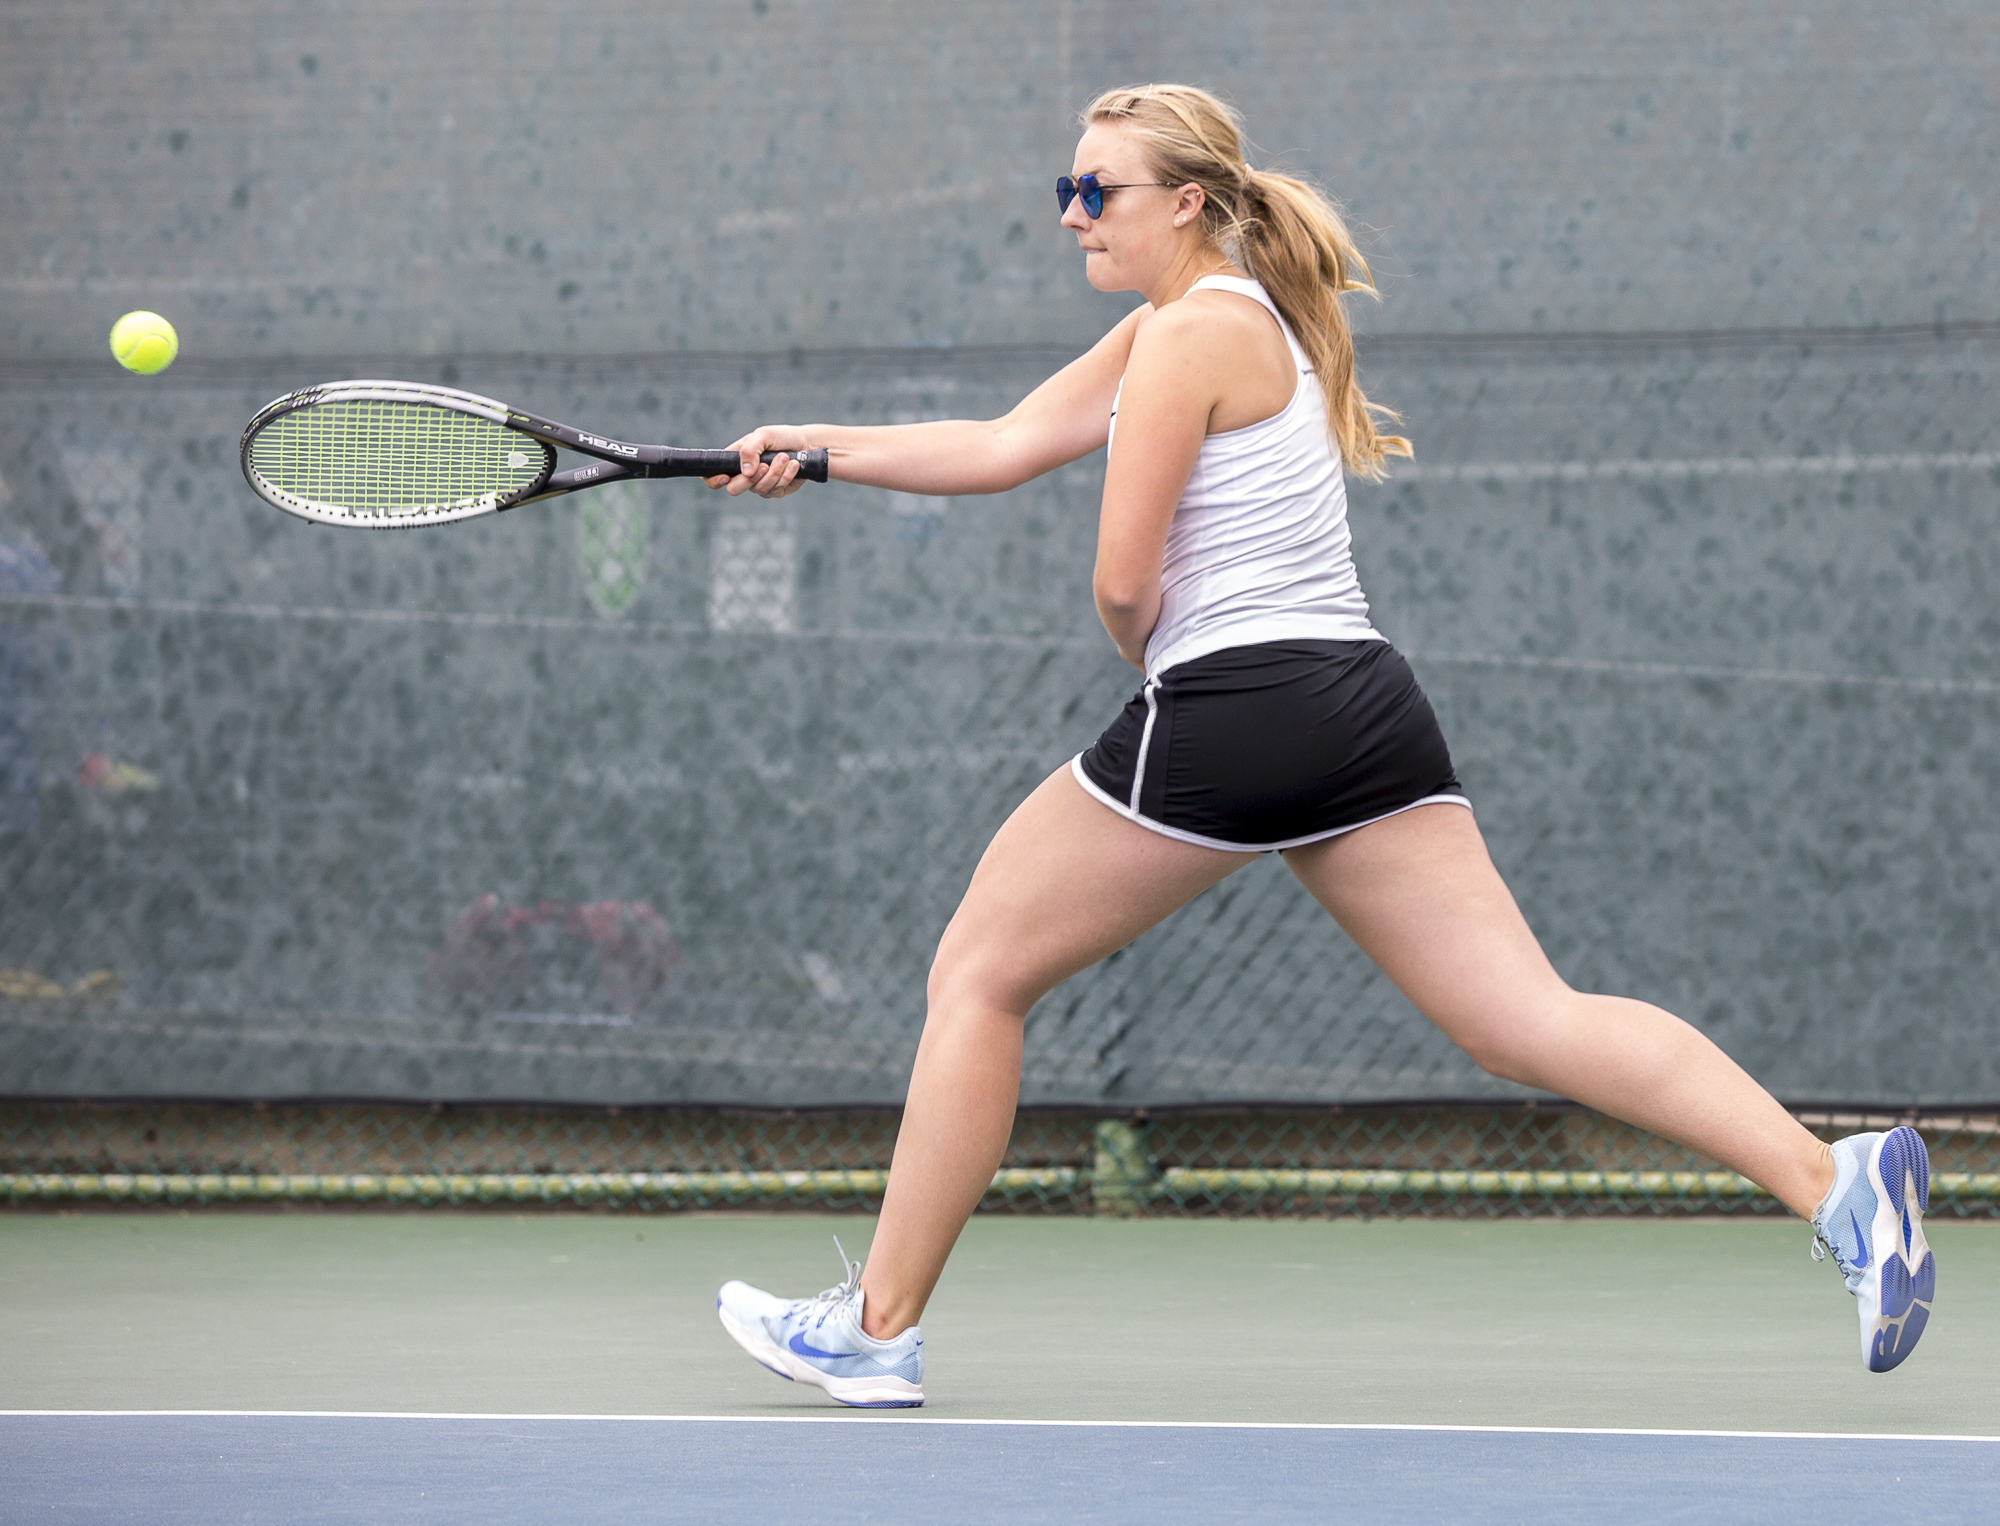  Santa Monica College Corsair Amanda Golling (#3, singles) prepares for a powerful, forehand swing against her Glendale City College Vaquero opponent at the Ocean View Park Tennis Courts in Santa Monica, California on Tuesday, March 20 2018. Golling 